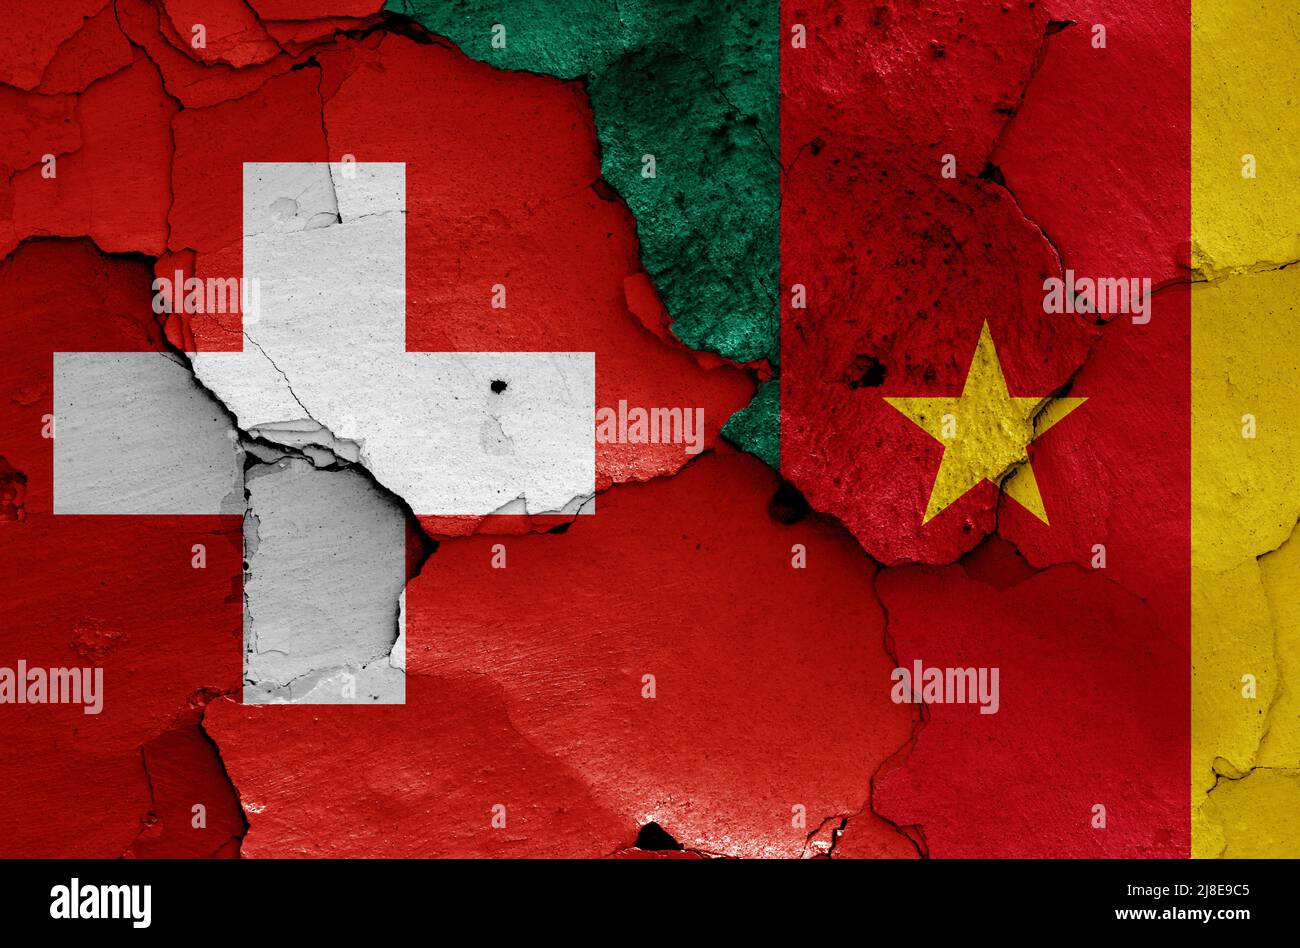 flags of Switzerland and Cameroon painted on cracked wall Stock Photo